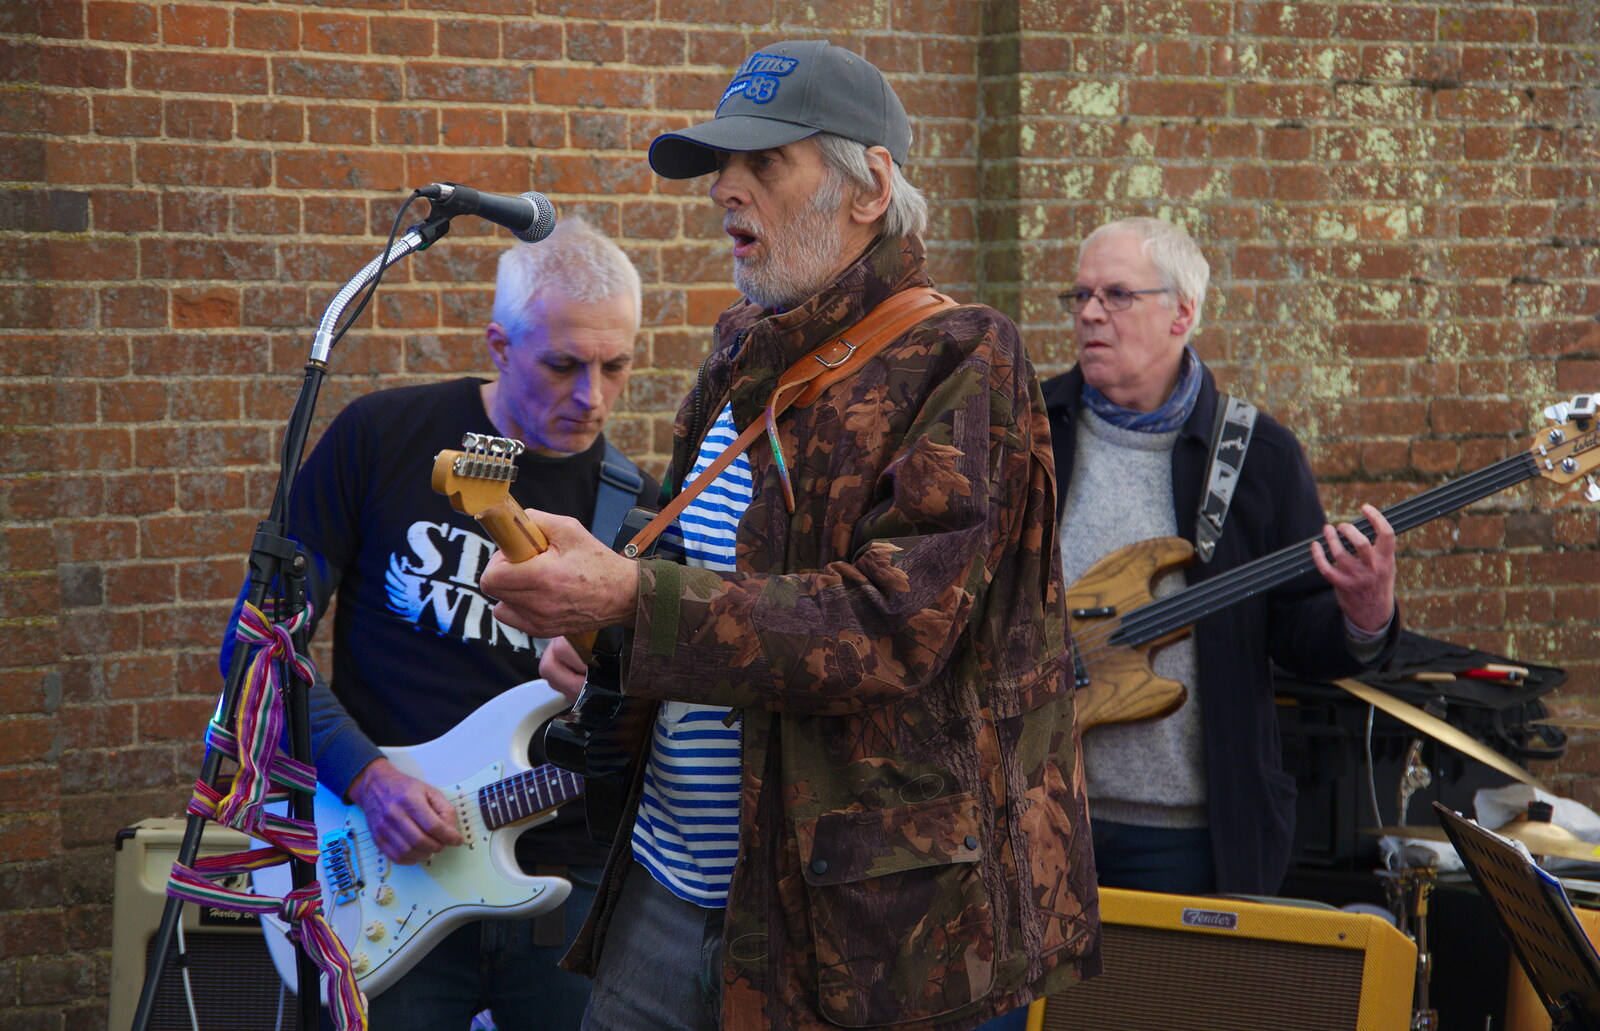 Some blues/rock action from The Opening of Star Wing Brewery's Tap Room, Redgrave, Suffolk - 4th May 2019